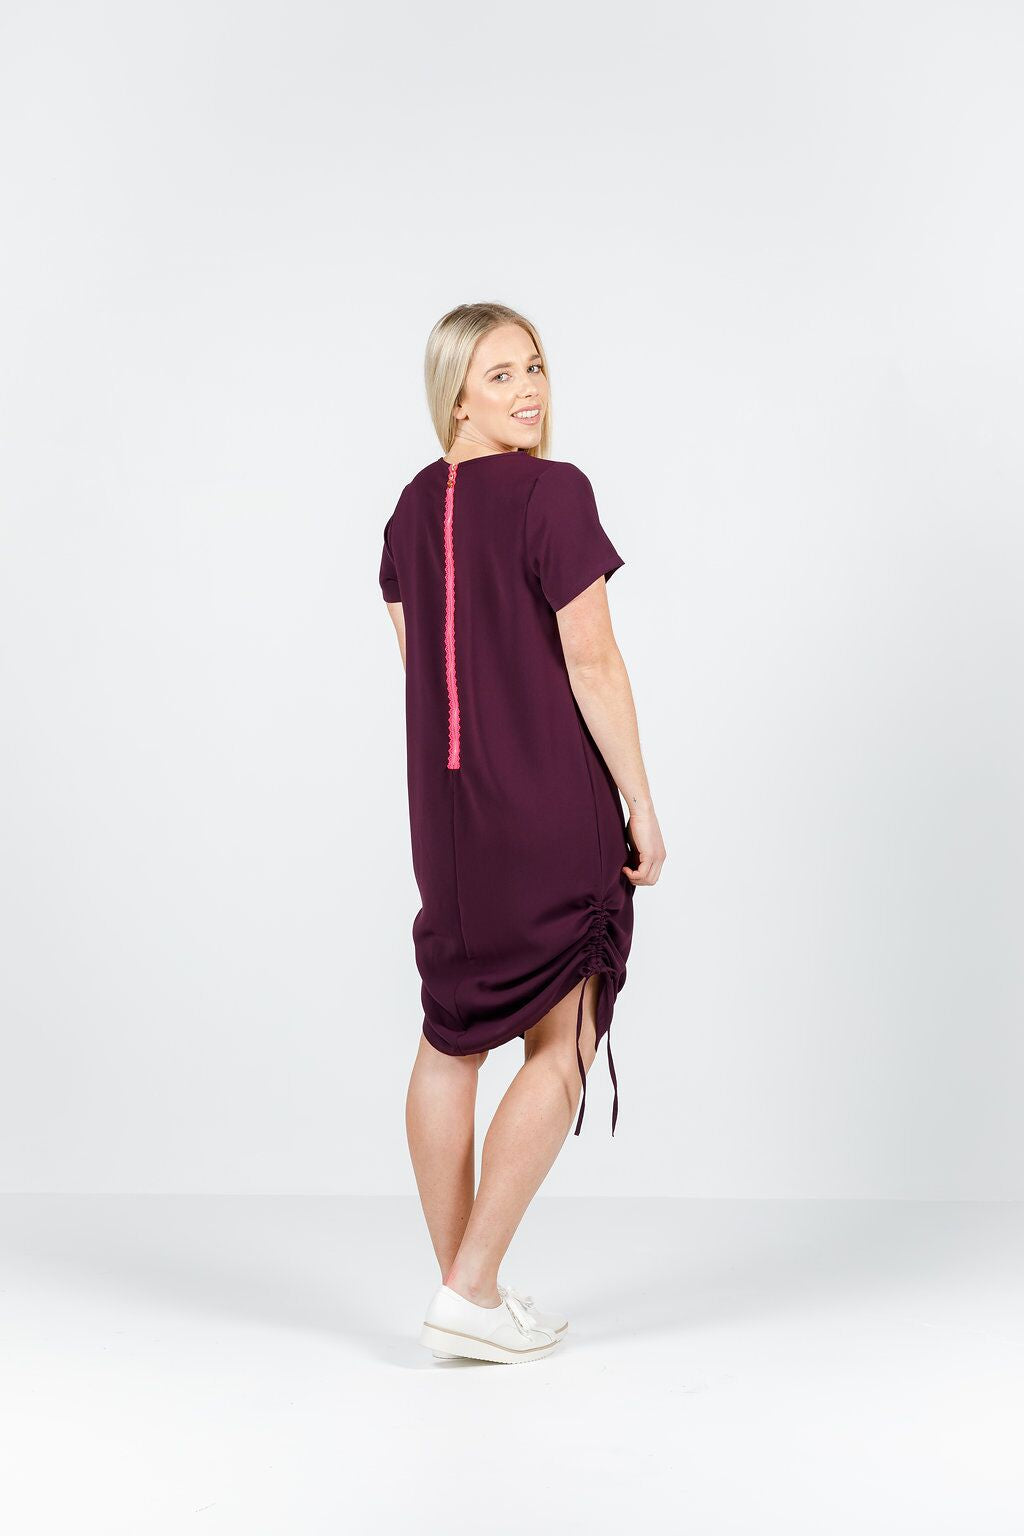 Ruched Zip Dress - Sale - Grape with pink zipper